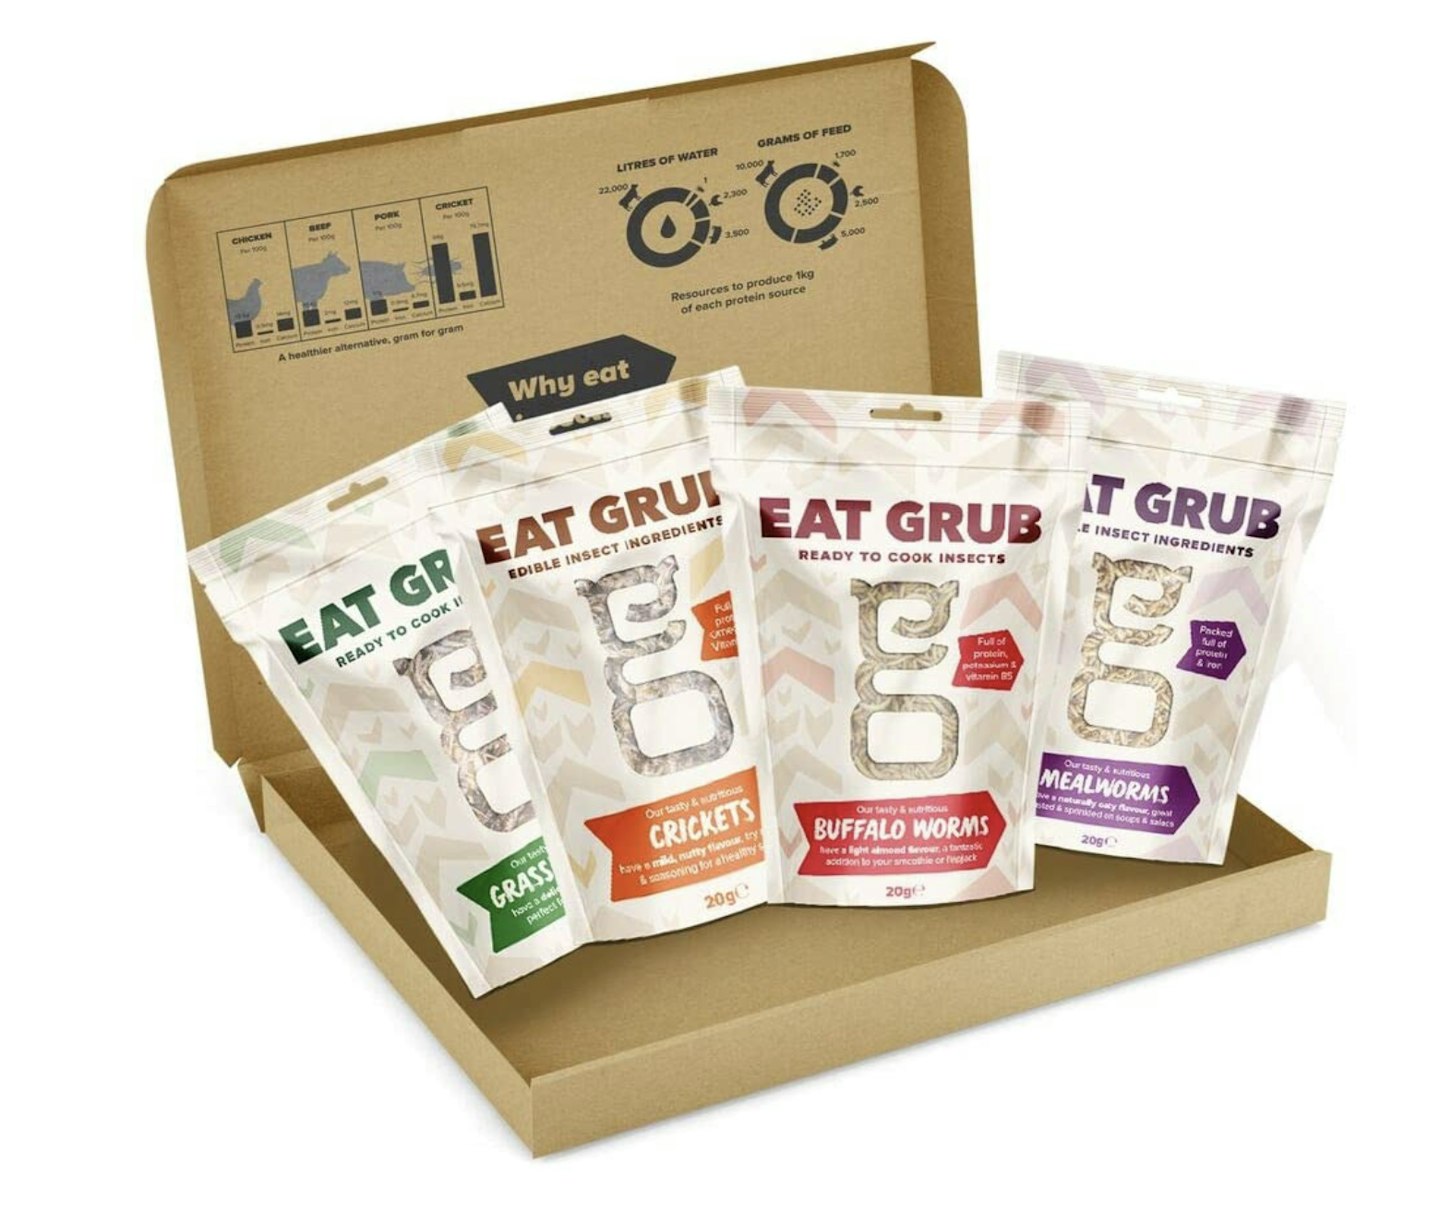 Edible Insects Foodie Pack: Crickets, Grasshoppers, Mealworms